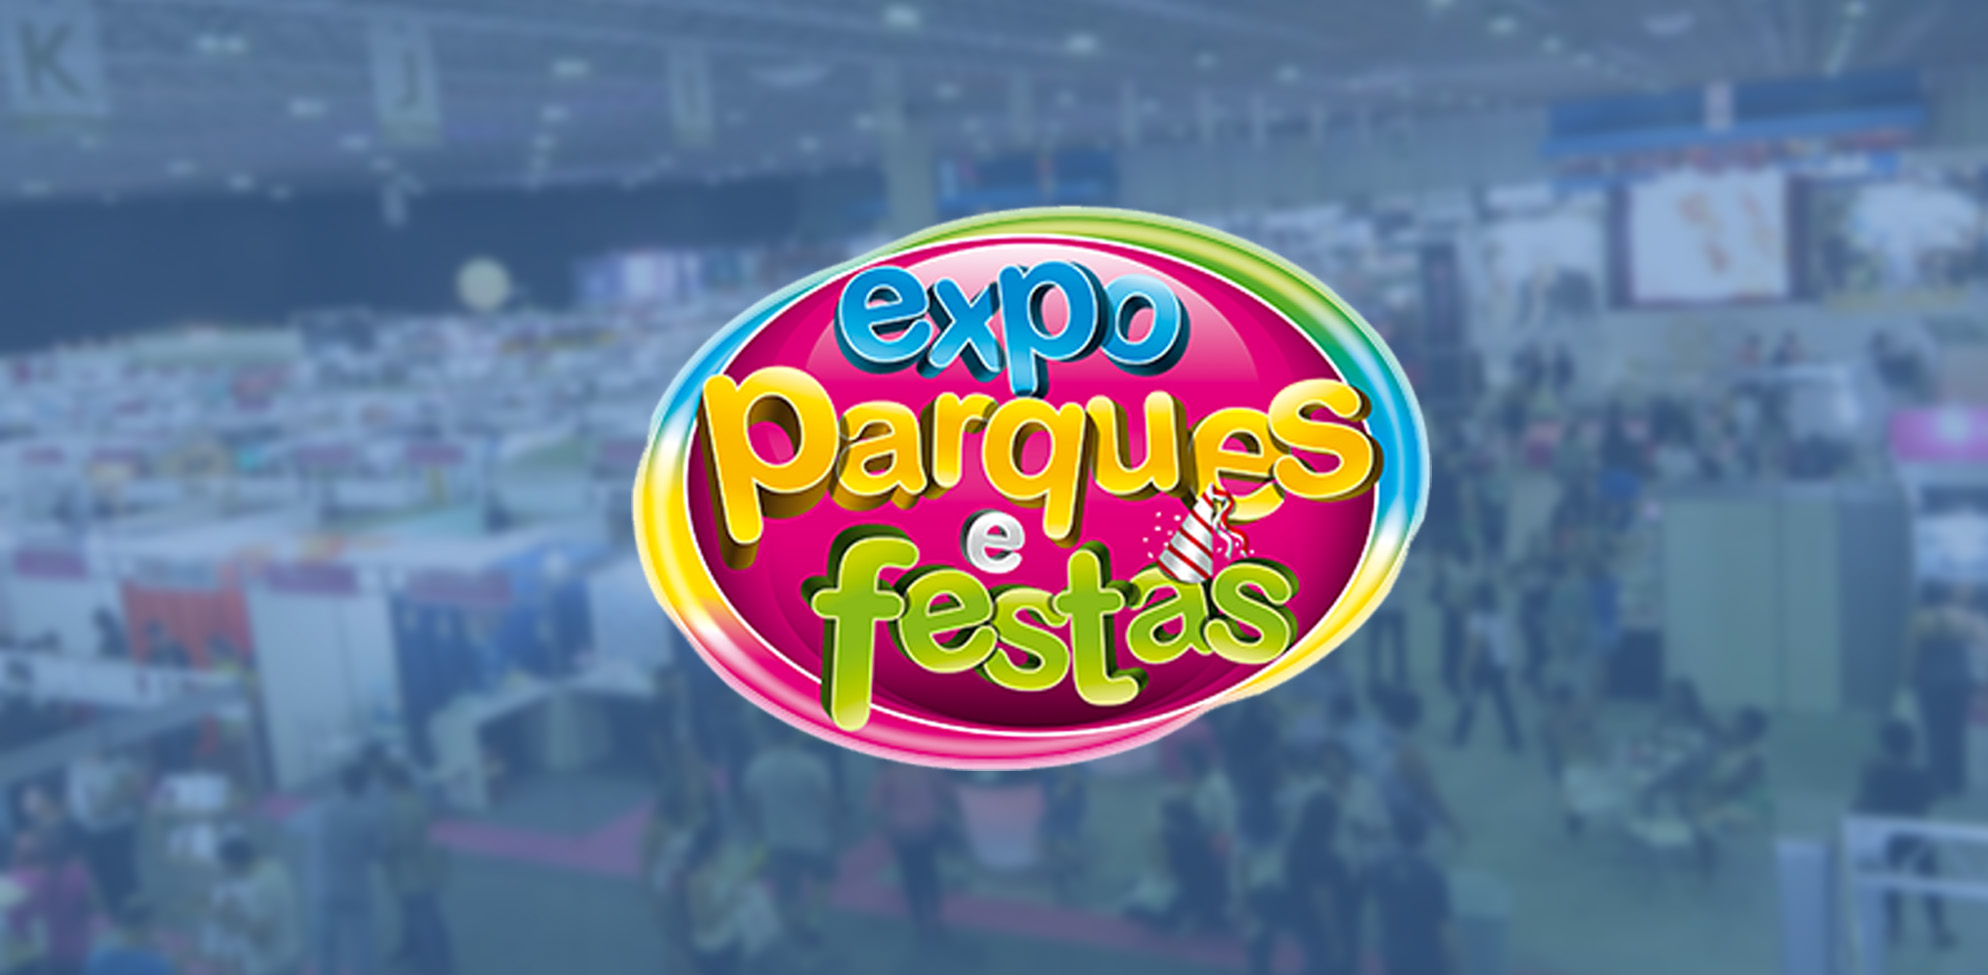 Expo Festas e Parques – (Fair of Party and Christmas Items, Sweets and Attractions) image